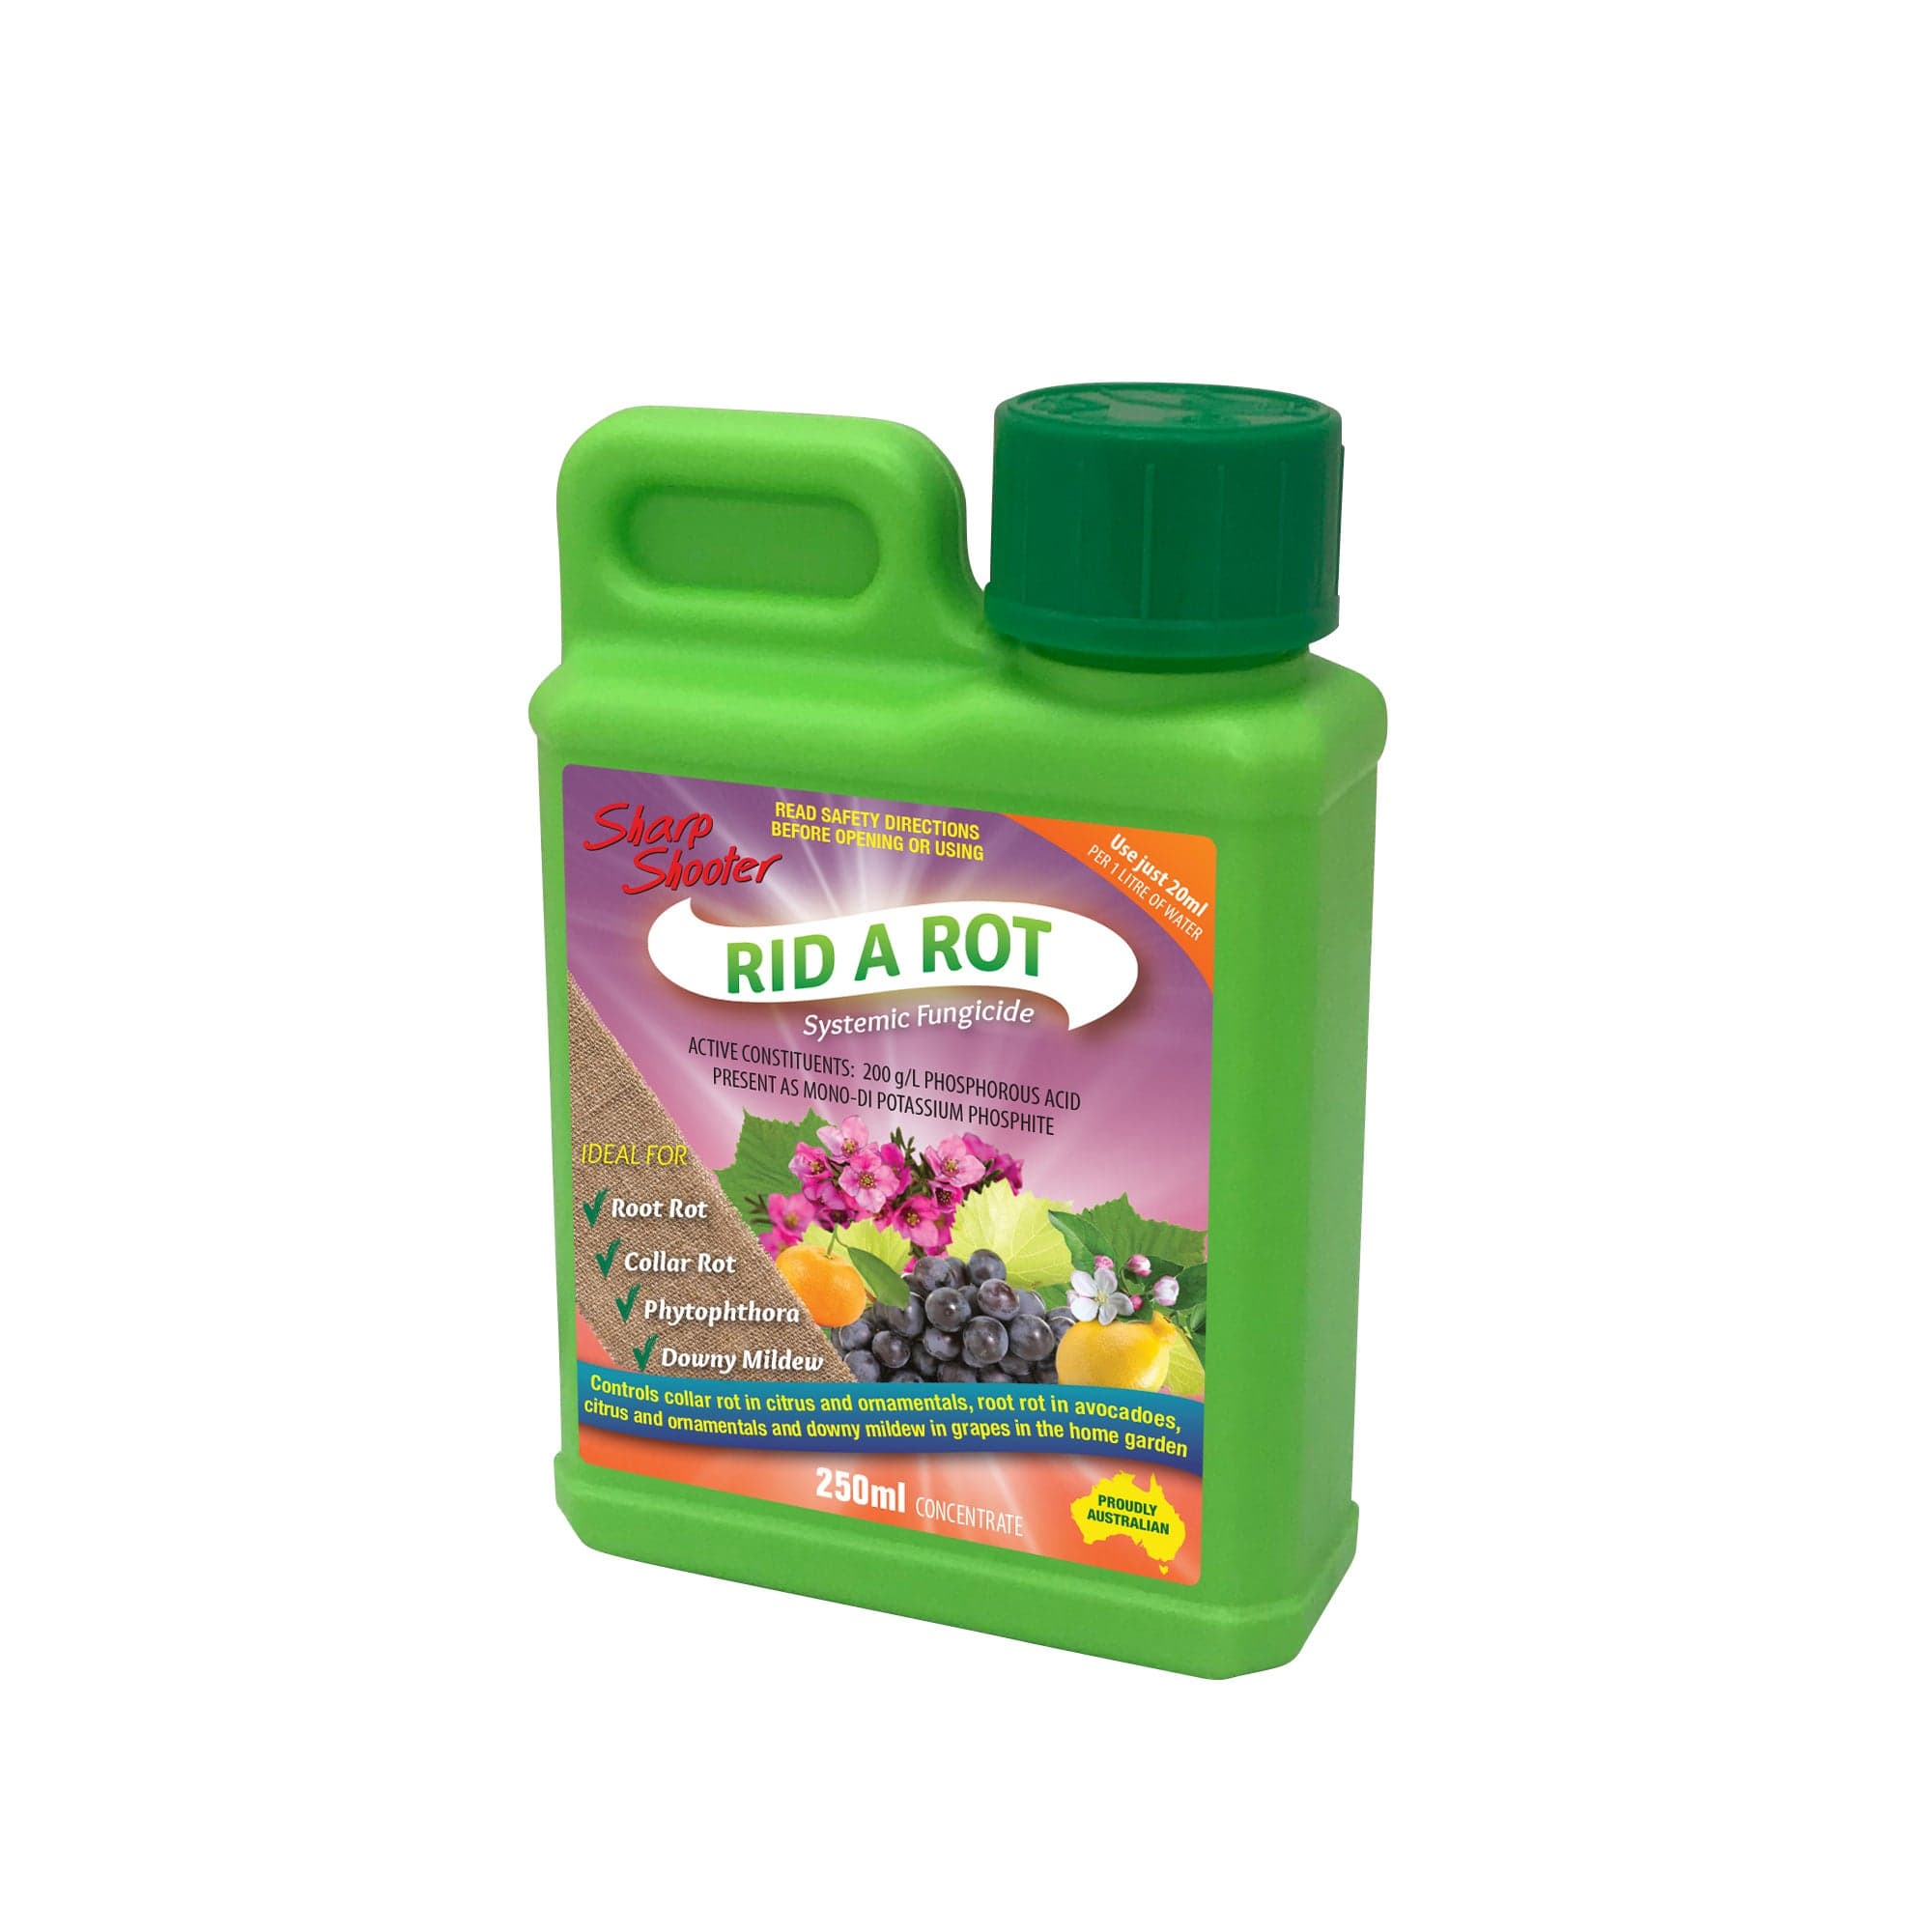 Dr Greenthumbs Rid-A-Rot 250ml (Fungicide)